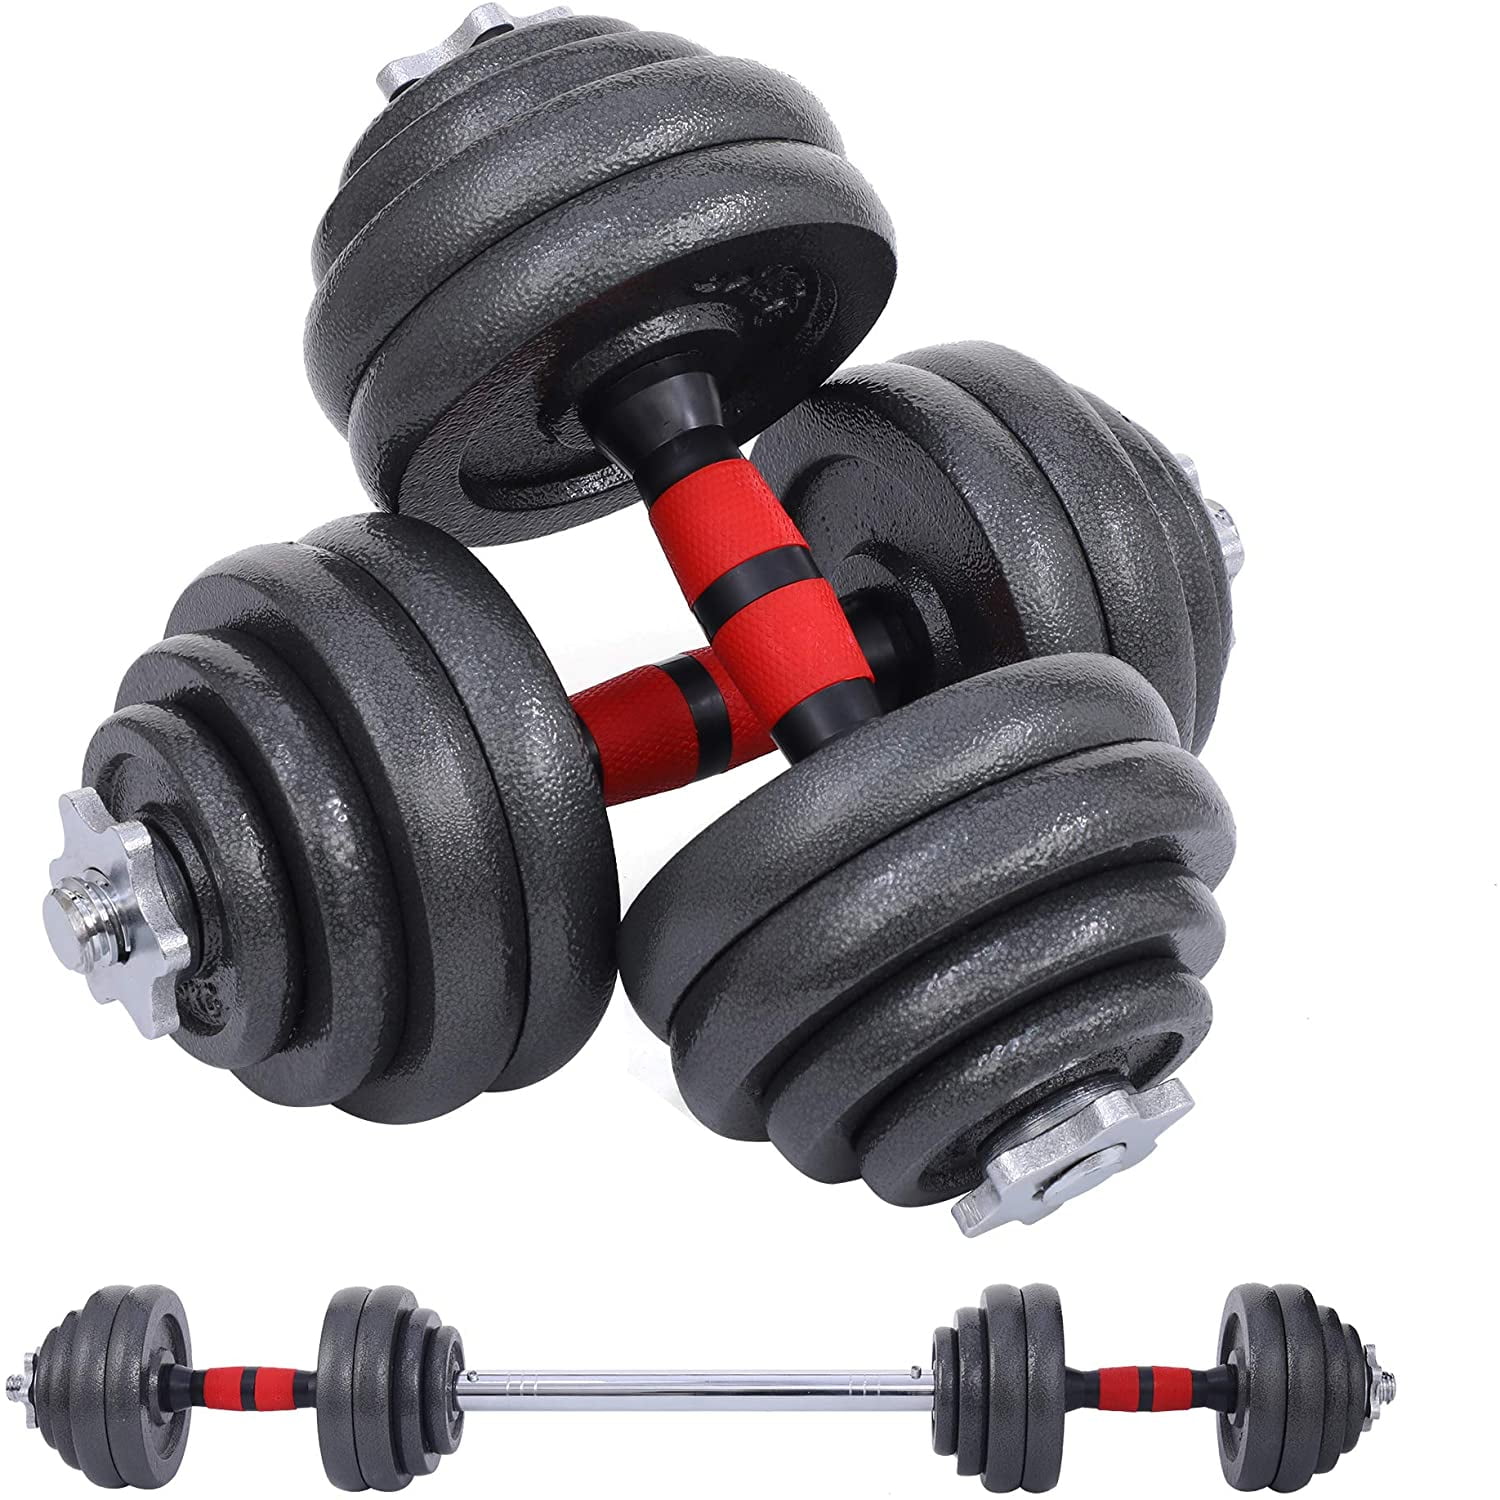 110LBS Weight Dumbbell Set Adjustable Fitness GYM Home Cast Full Steel Plates 